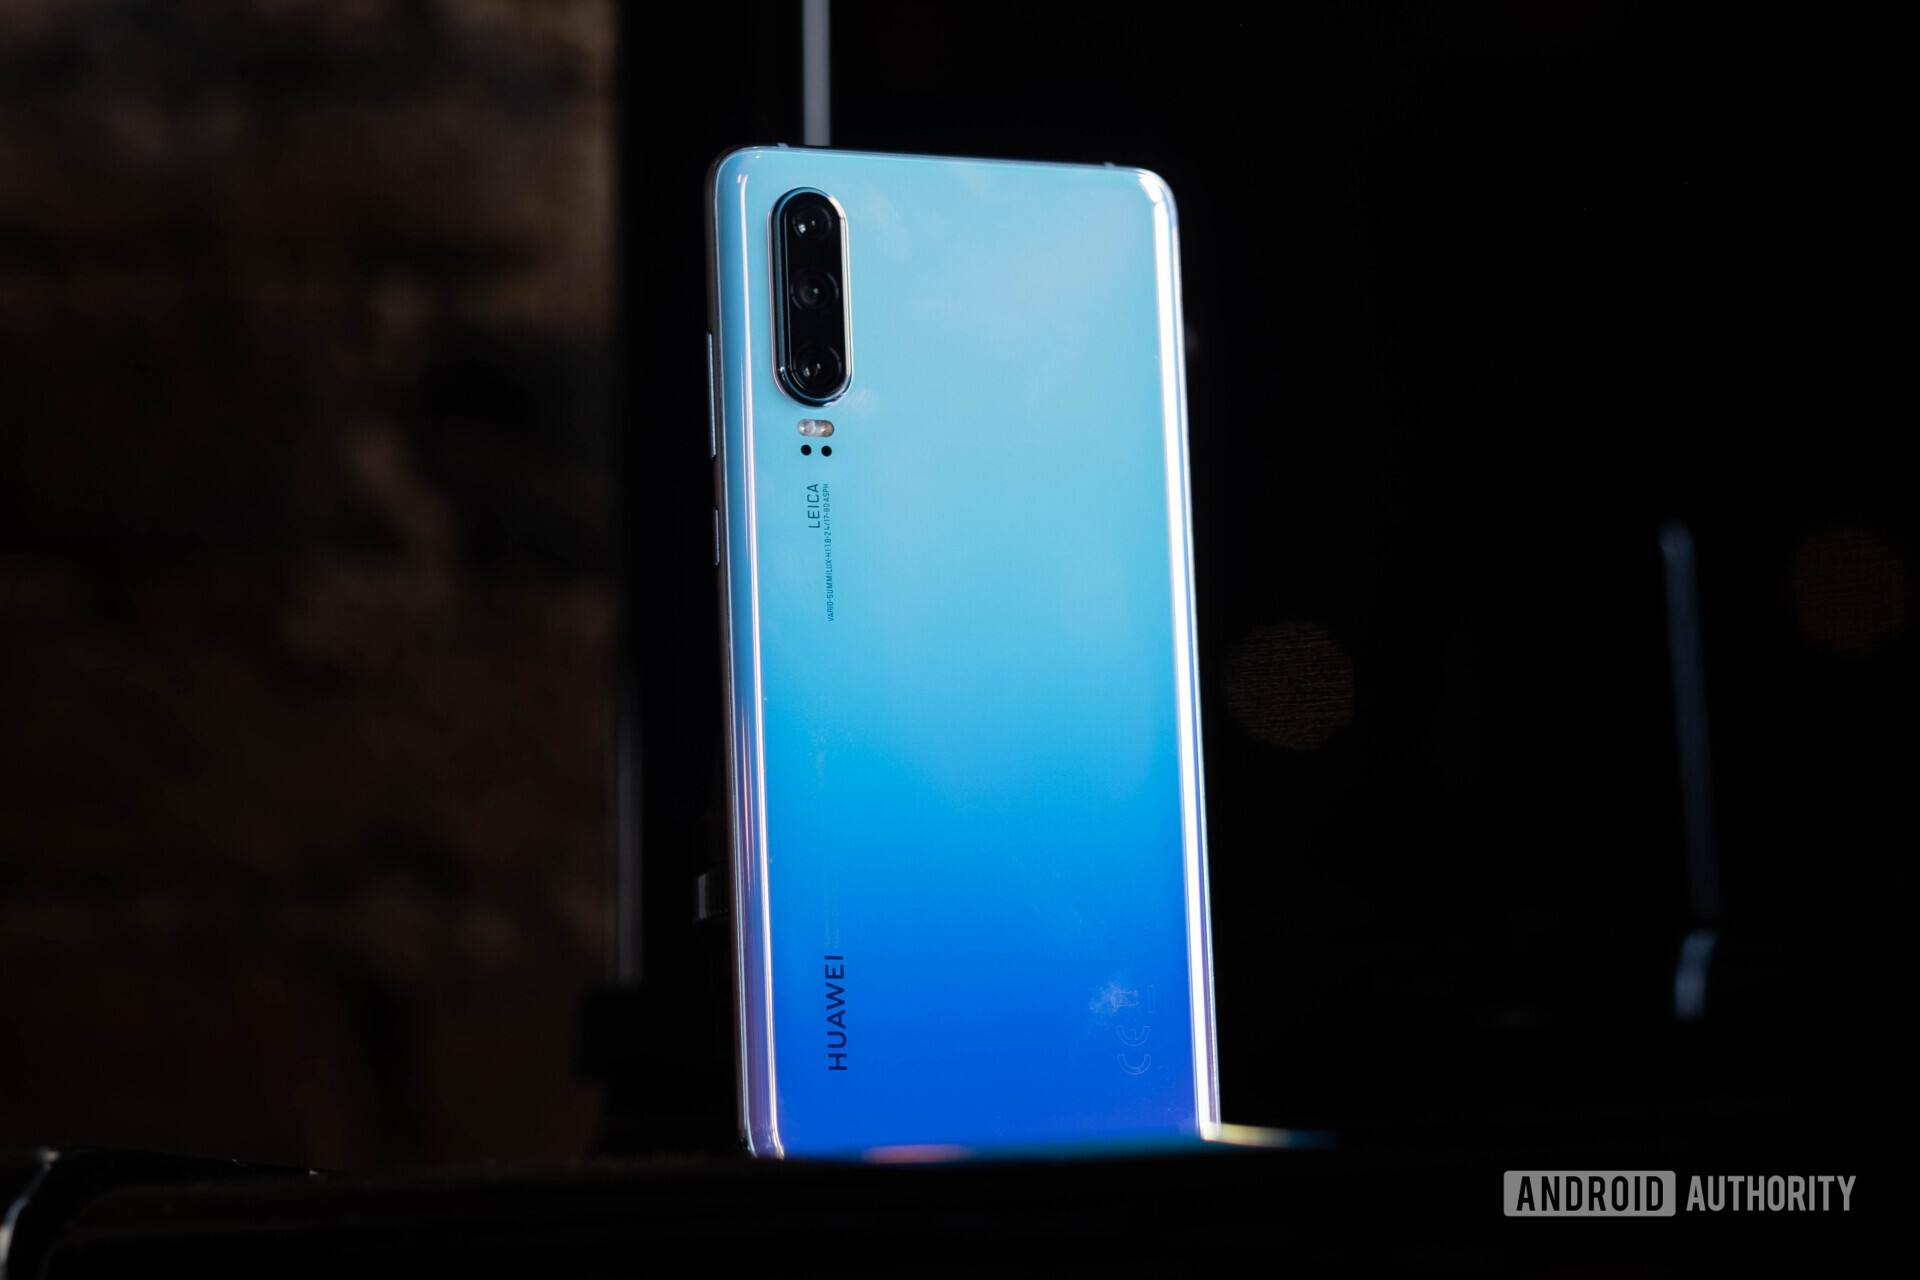 Huawei says the Huawei P30 series will get Android Q.